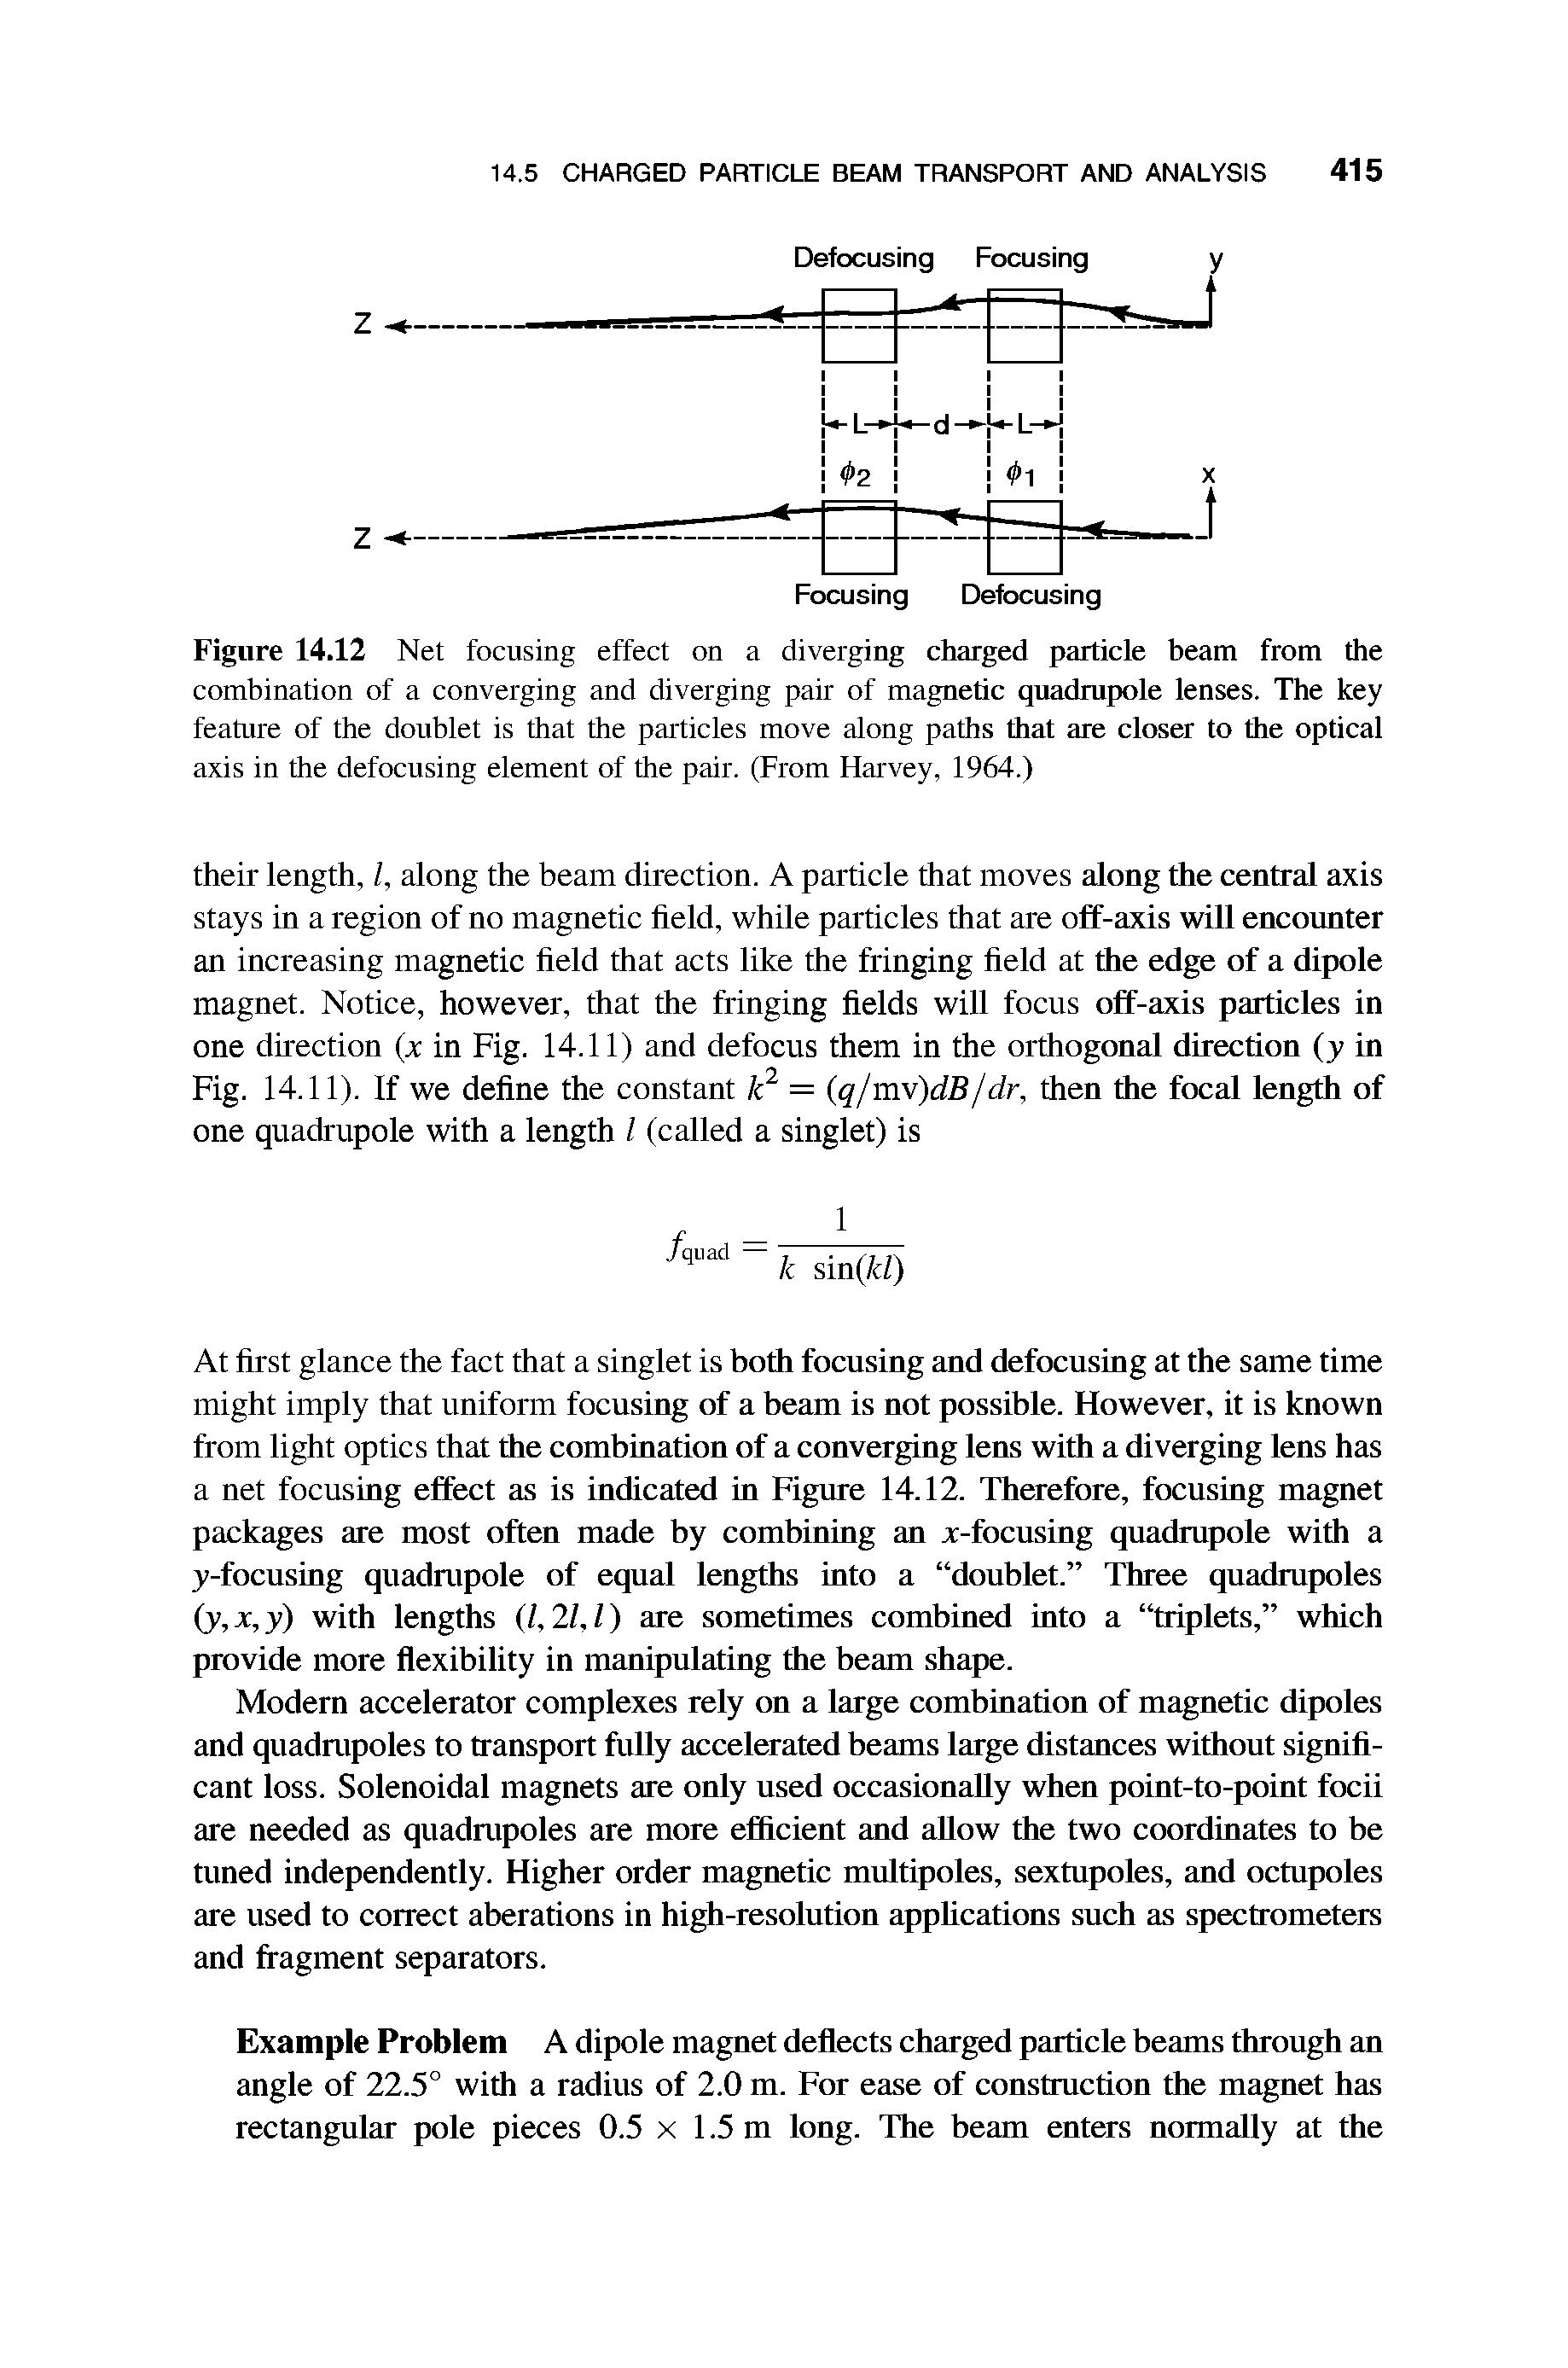 Figure 14.12 Net focusing effect on a diverging charged particle beam from the combination of a converging and diverging pair of magnetic quadrupole lenses. The key feature of the doublet is that the particles move along paths that are closer to the optical axis in the defocusing element of the pair. (From Harvey, 1964.)...